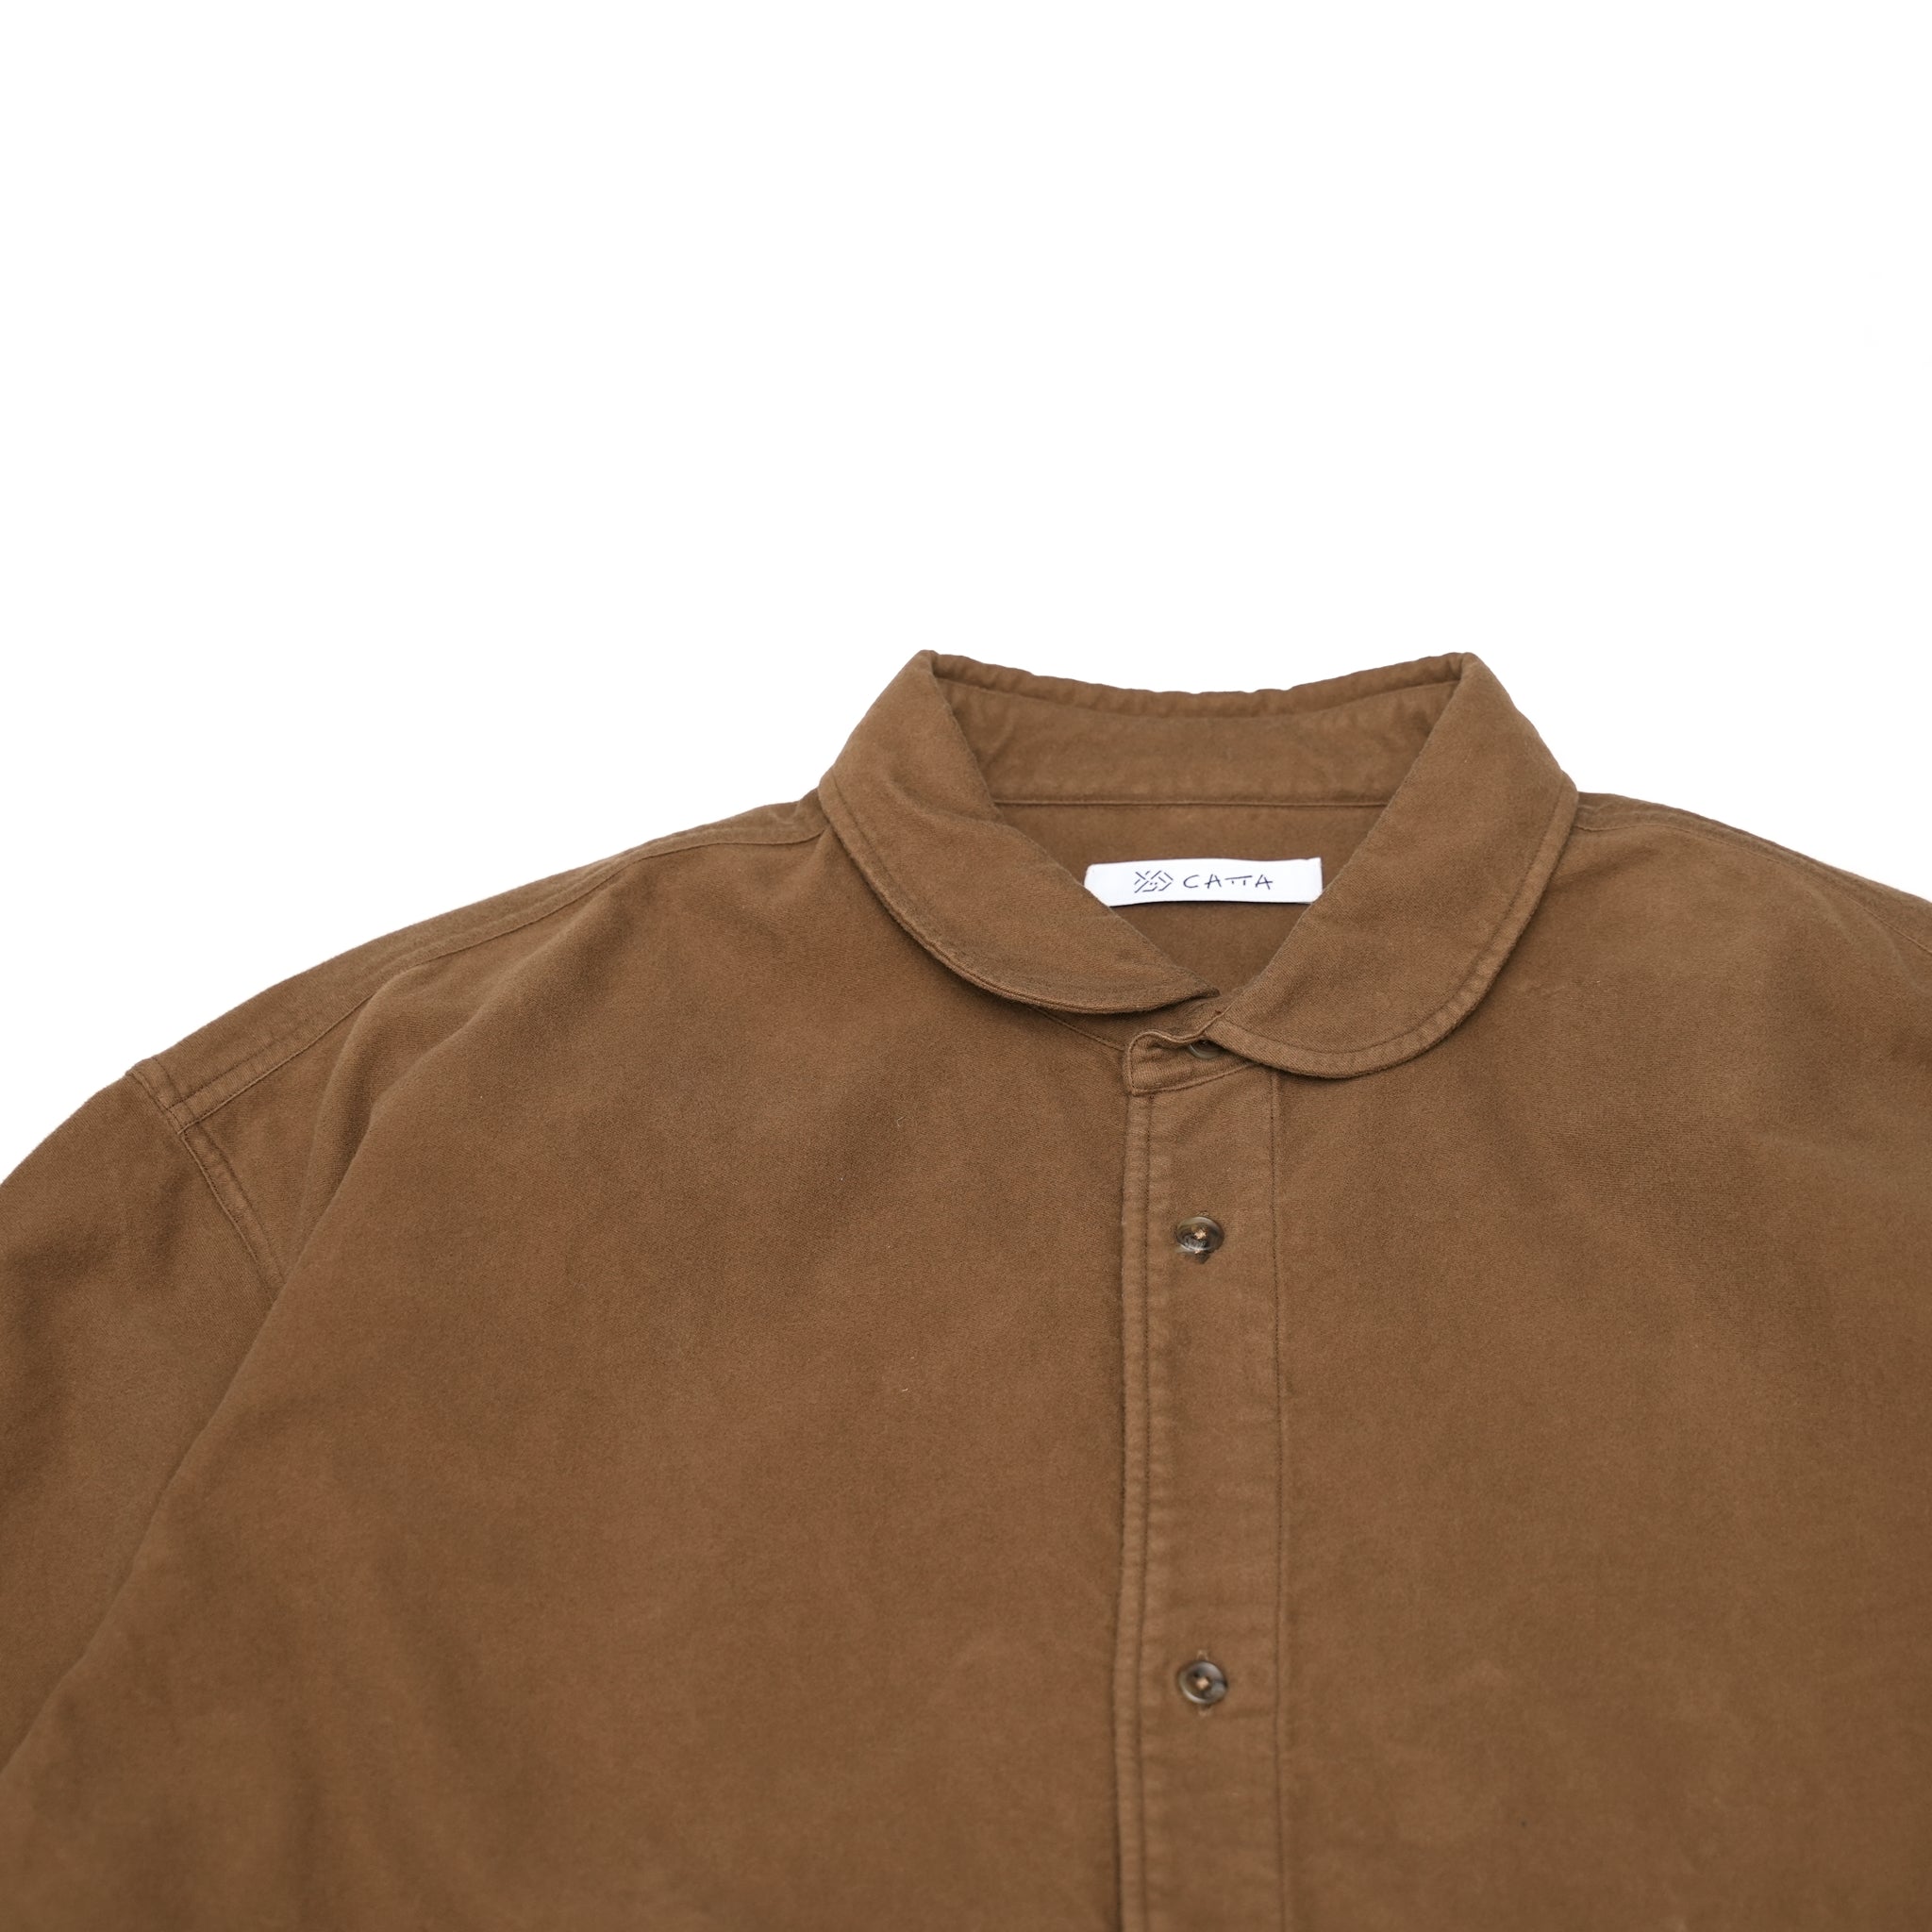 No:SP-02 | Name:Sidepocket Shirts Suede | Color:Black/Brown | Size:L【CATTA_カッタ】